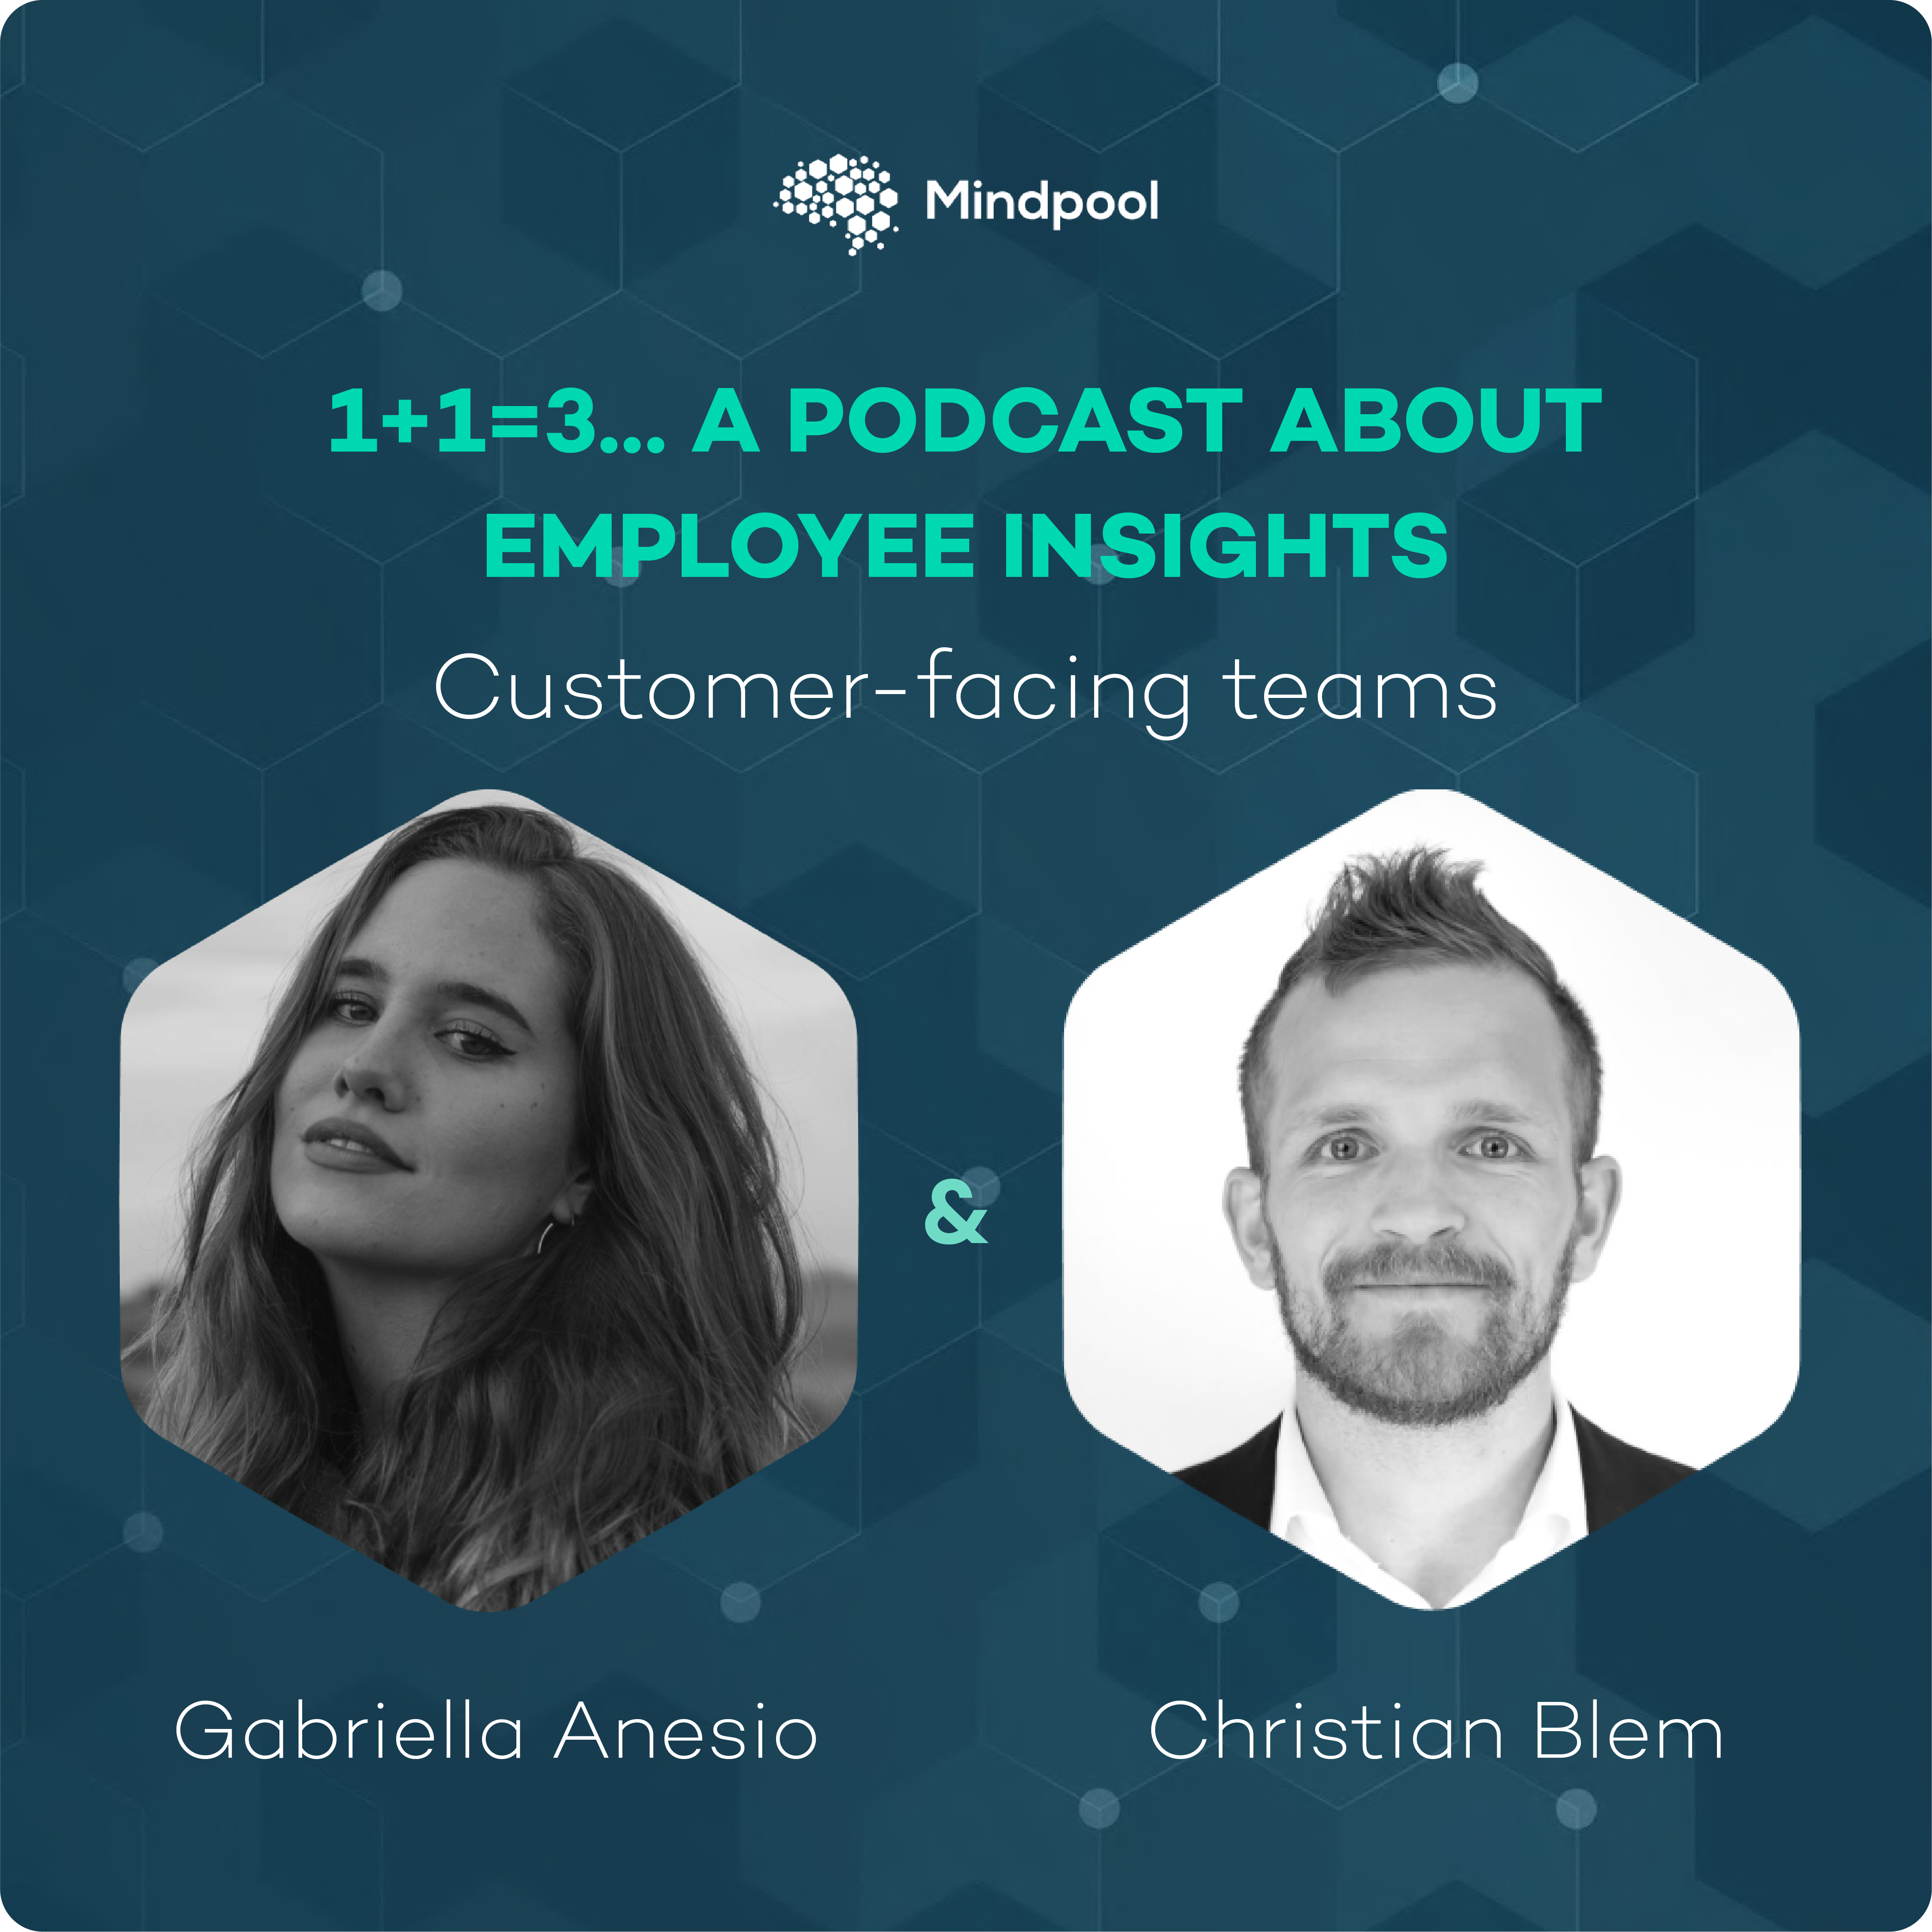 <p>1+1=3: A podcast about employee insights #5</p>